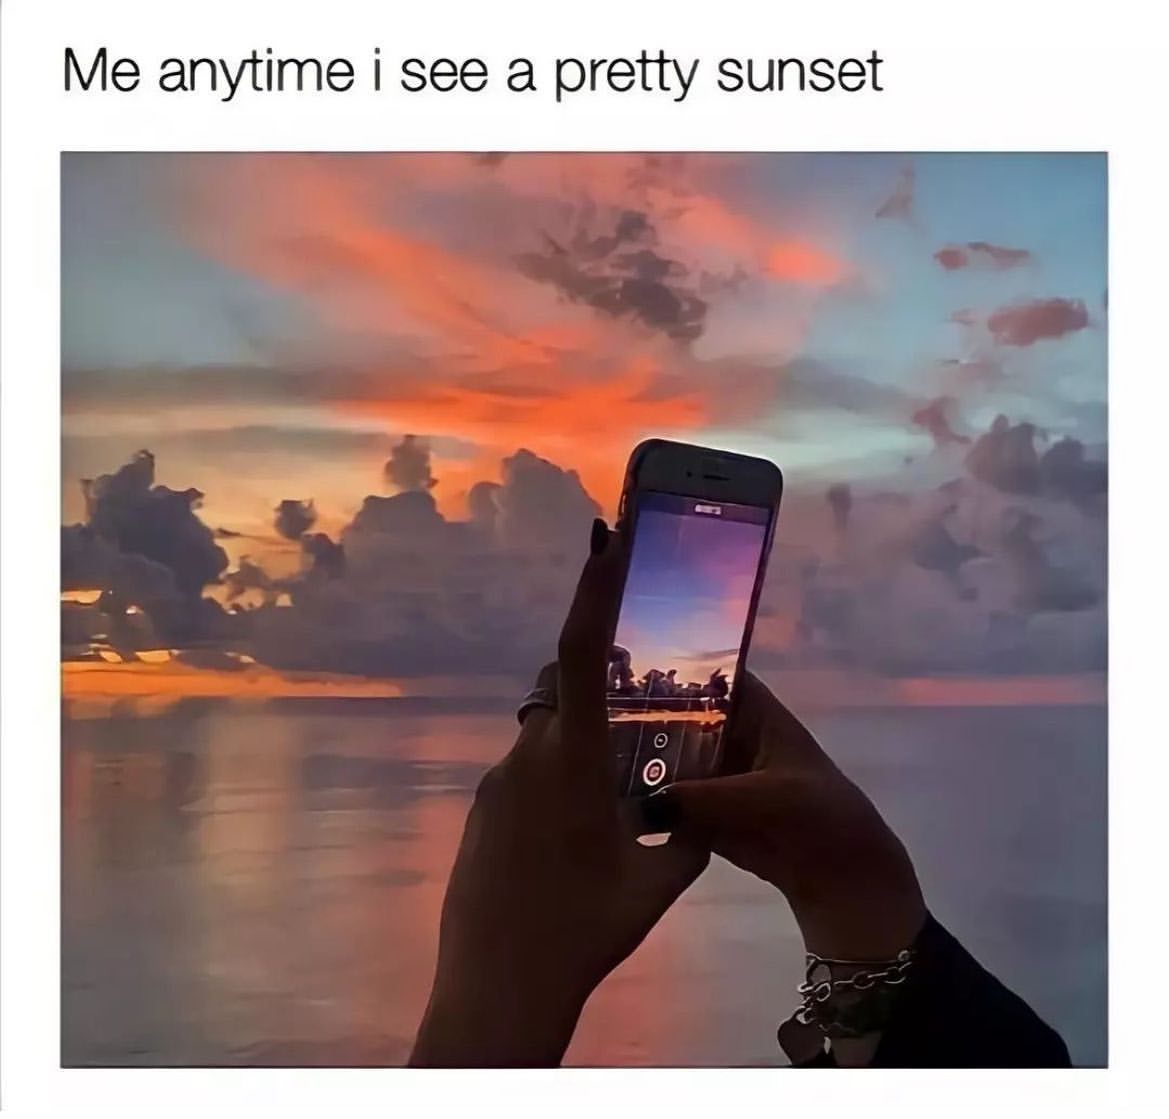 Me anytime I see a pretty sunset.